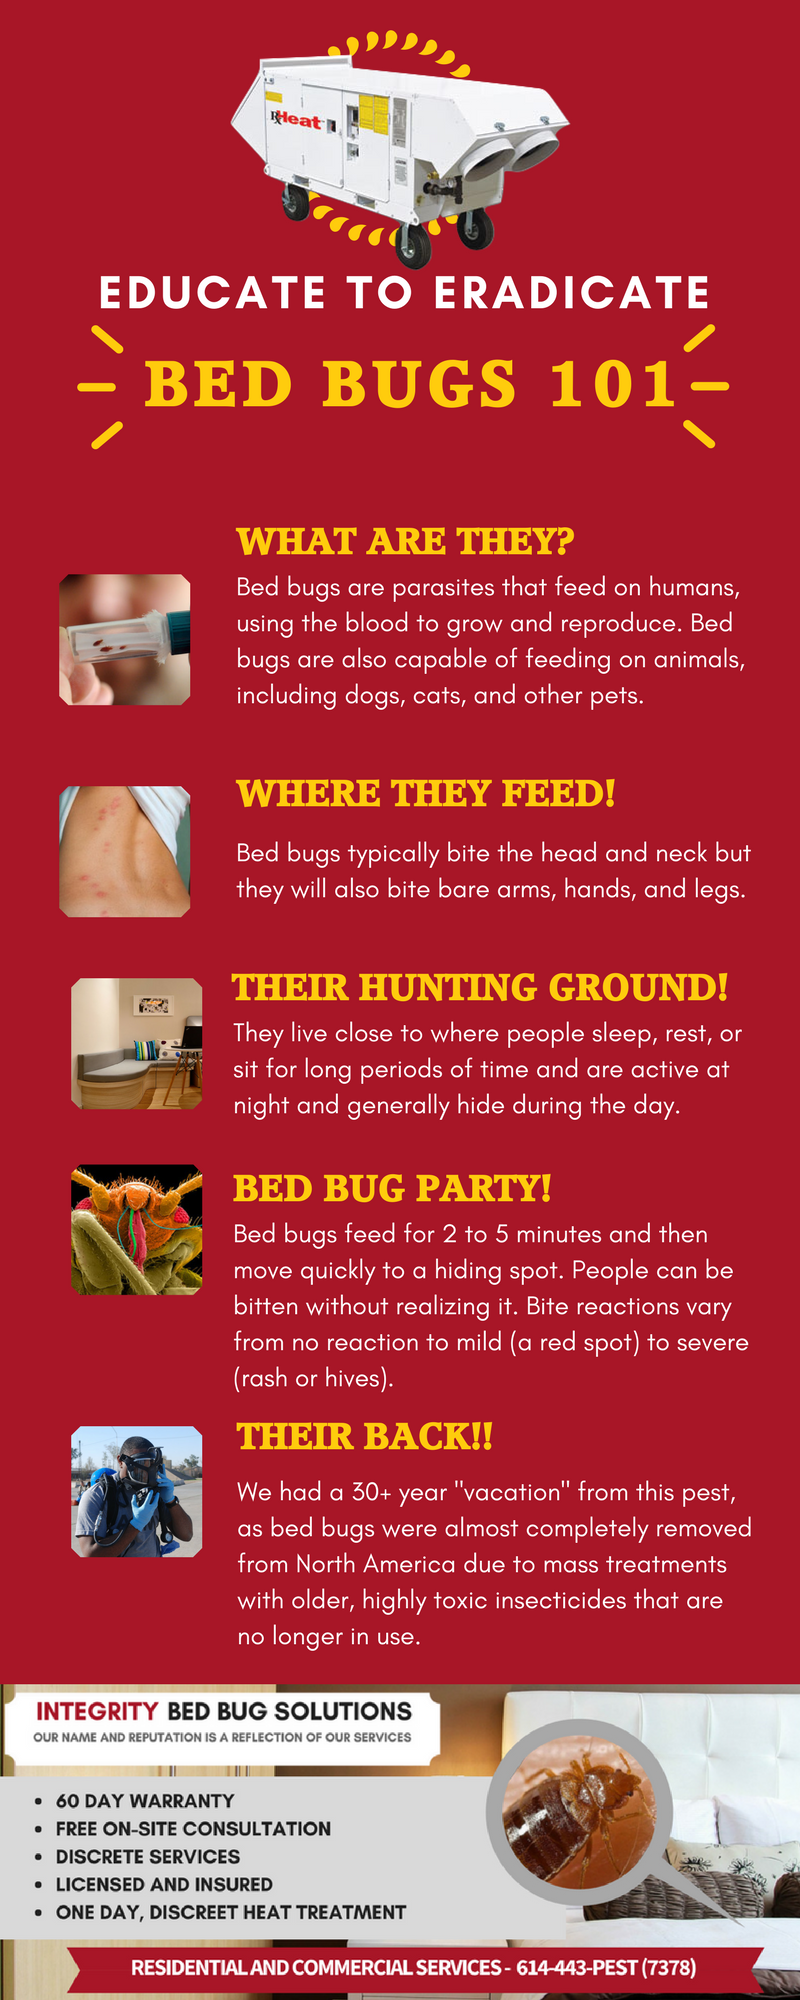 https://www.ohiogotbugs.com/wp-content/uploads/2019/03/bed-bugs-are-parasites-that-feed-on-humans-using-the-blood-to-grow-and-reproduce-bed-bugs-are-also-capable-of-feeding-on-animals-including-dogs-cats-and-other-pets_orig.png